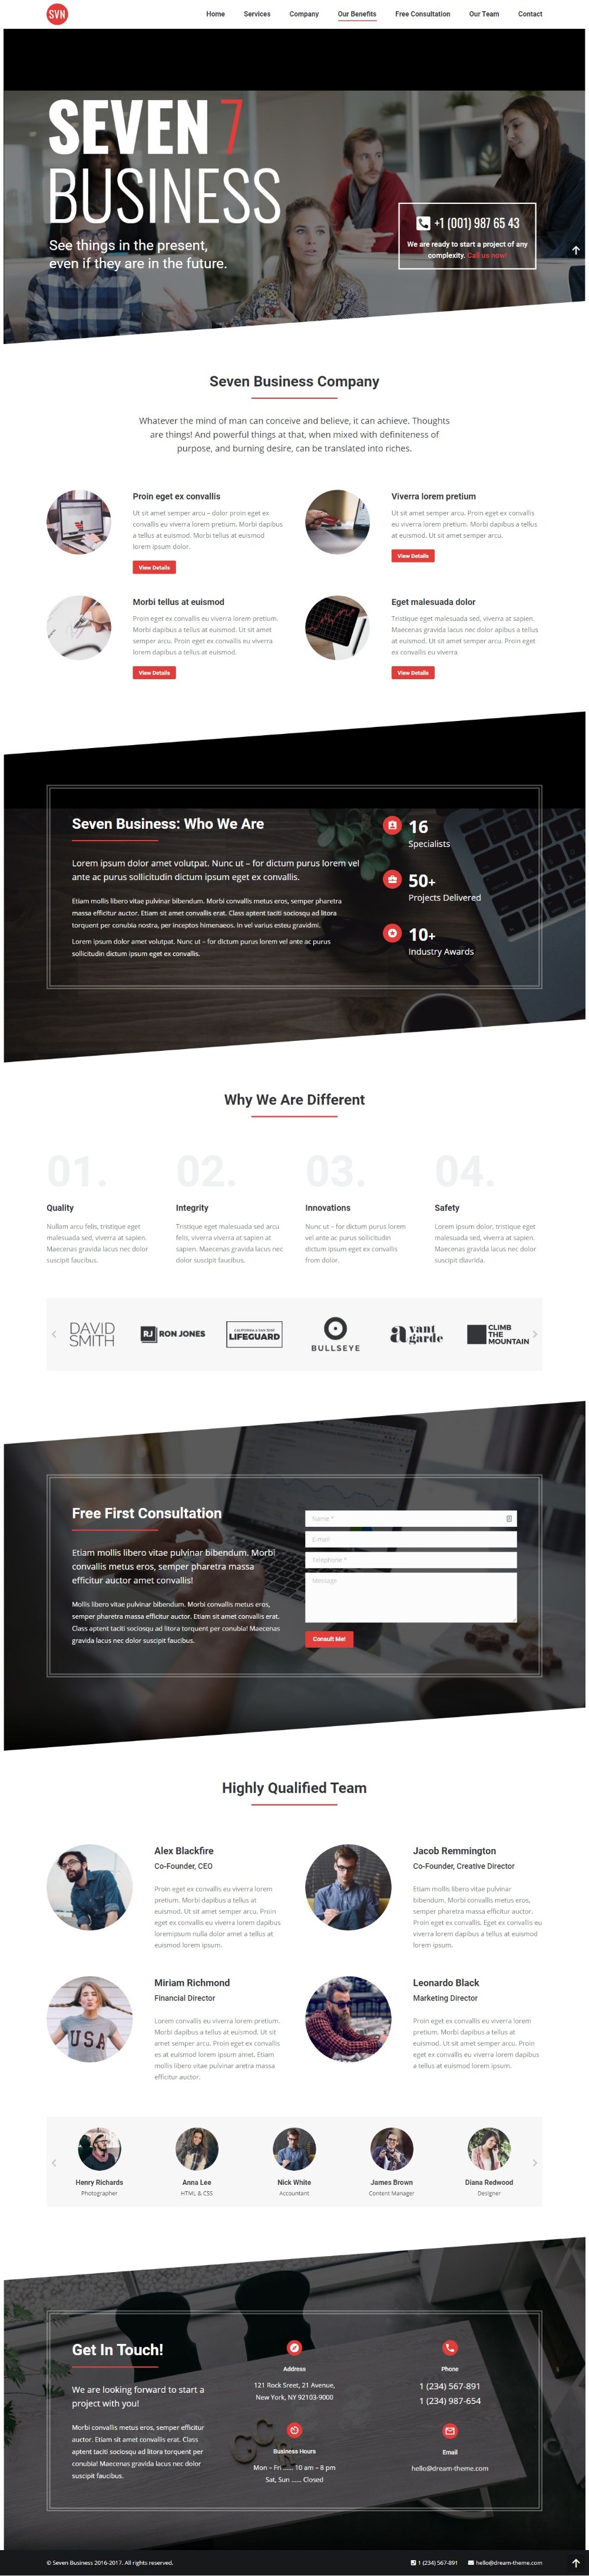 Mẫu Landing Page Dịch Vụ Công Ty - Business One-Page